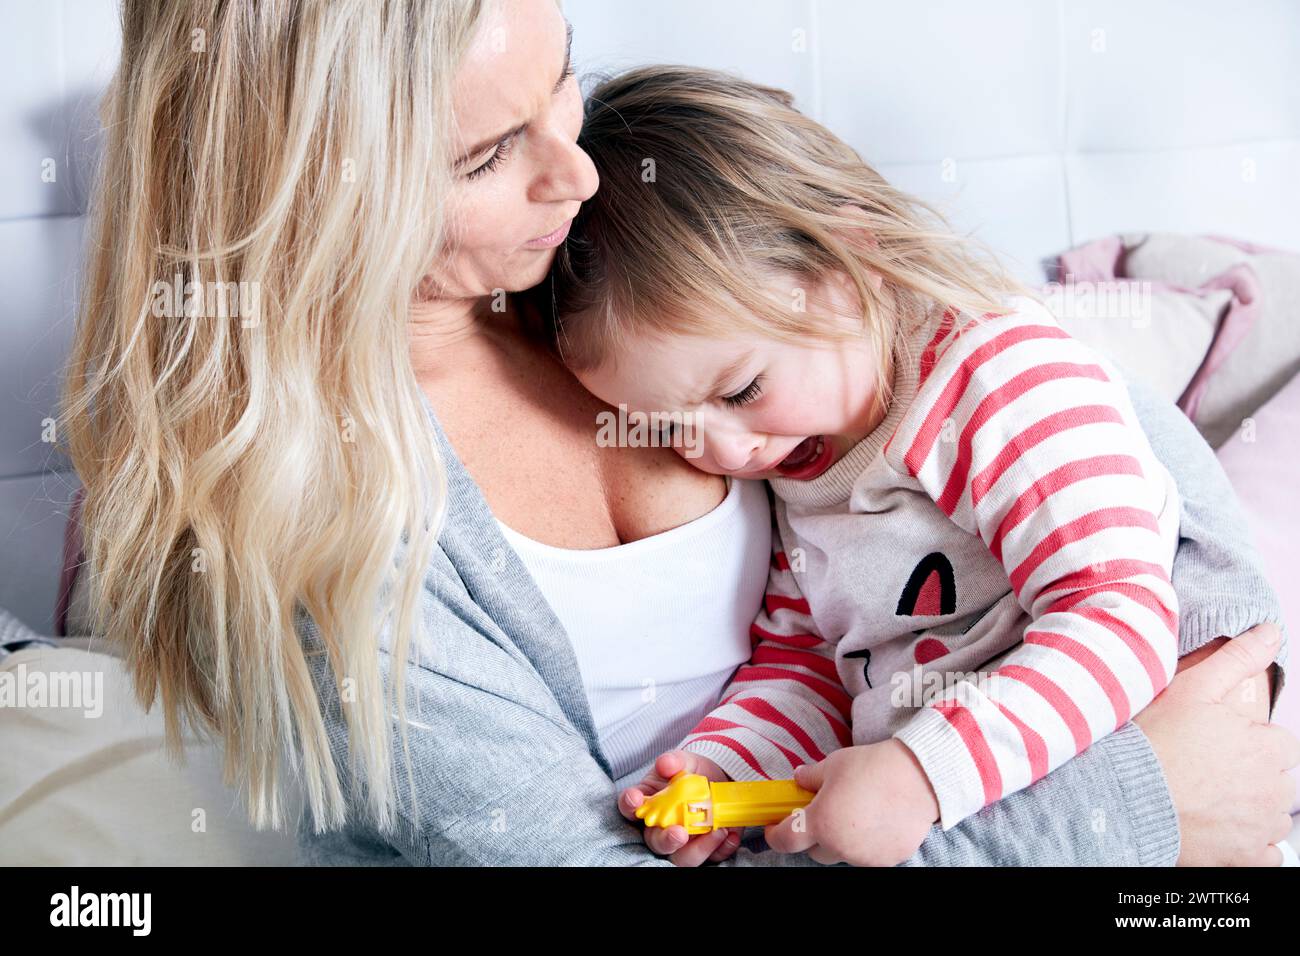 Mother comforting her crying child Stock Photo